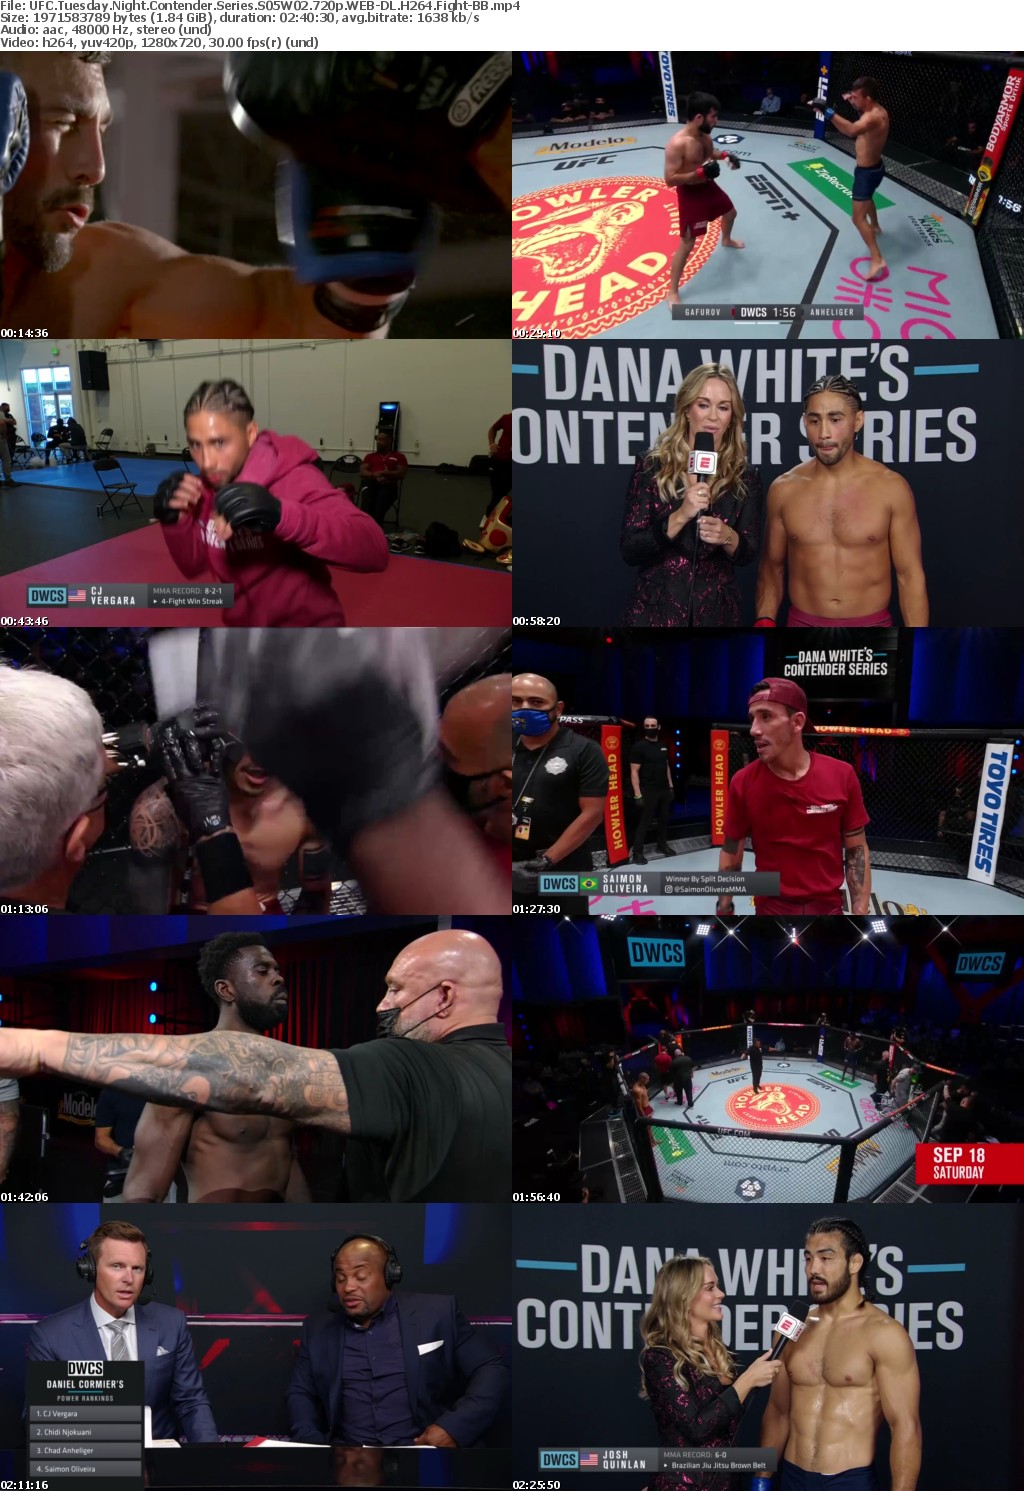 UFC Tuesday Night Contender Series S05W02 720p WEB-DL H264 Fight-BB